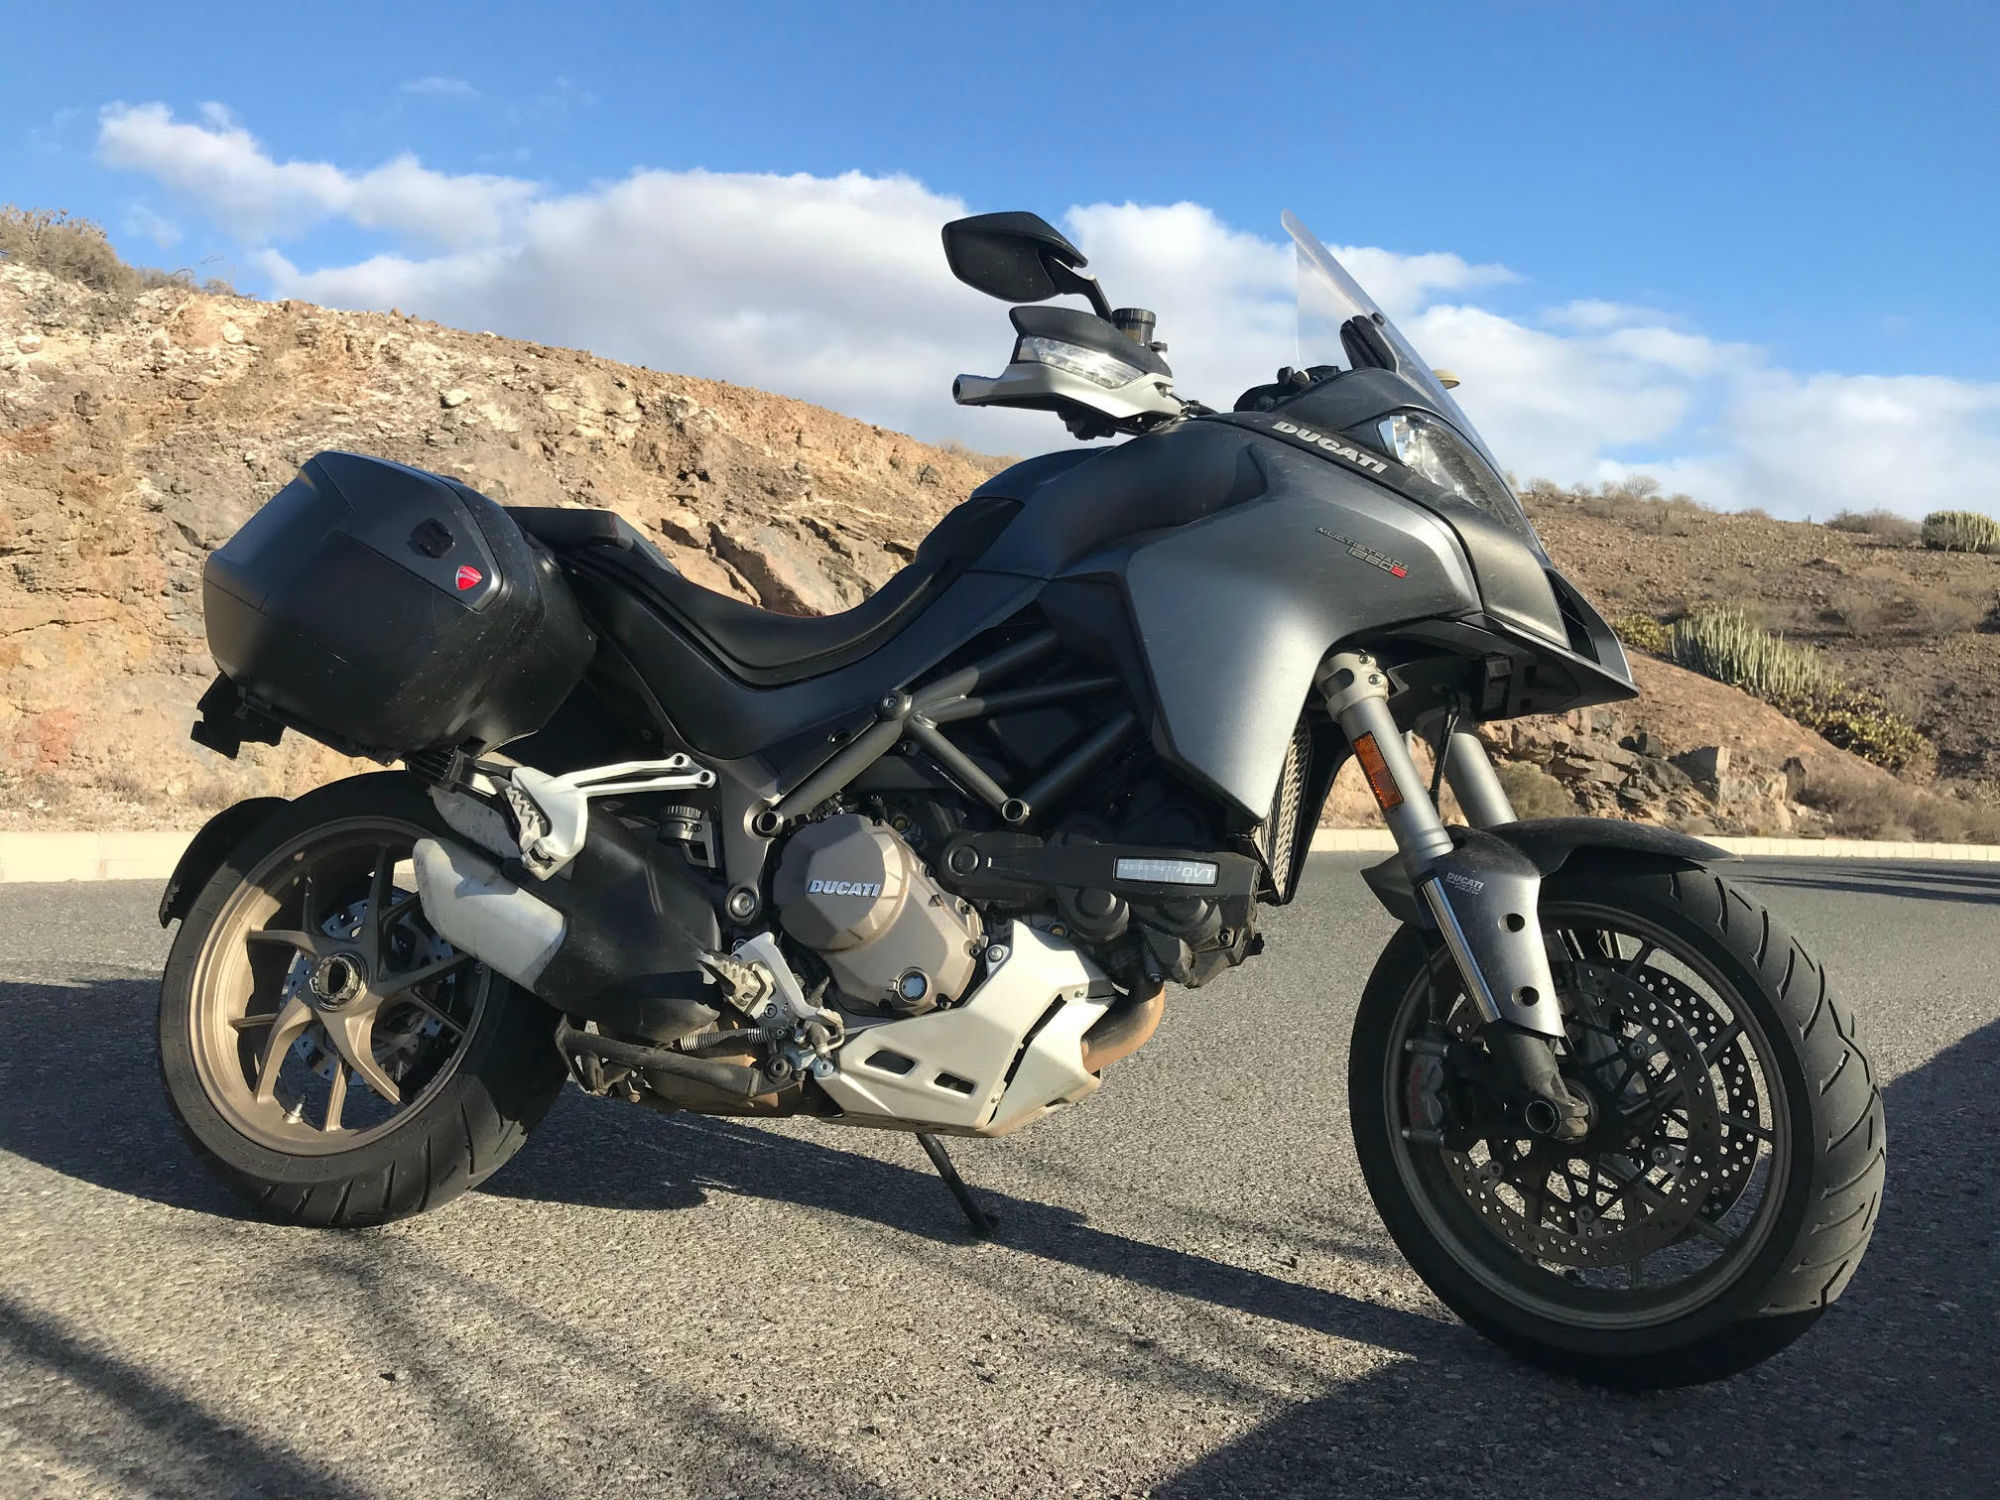 Ducati Multistrada 1260 review: first thoughts